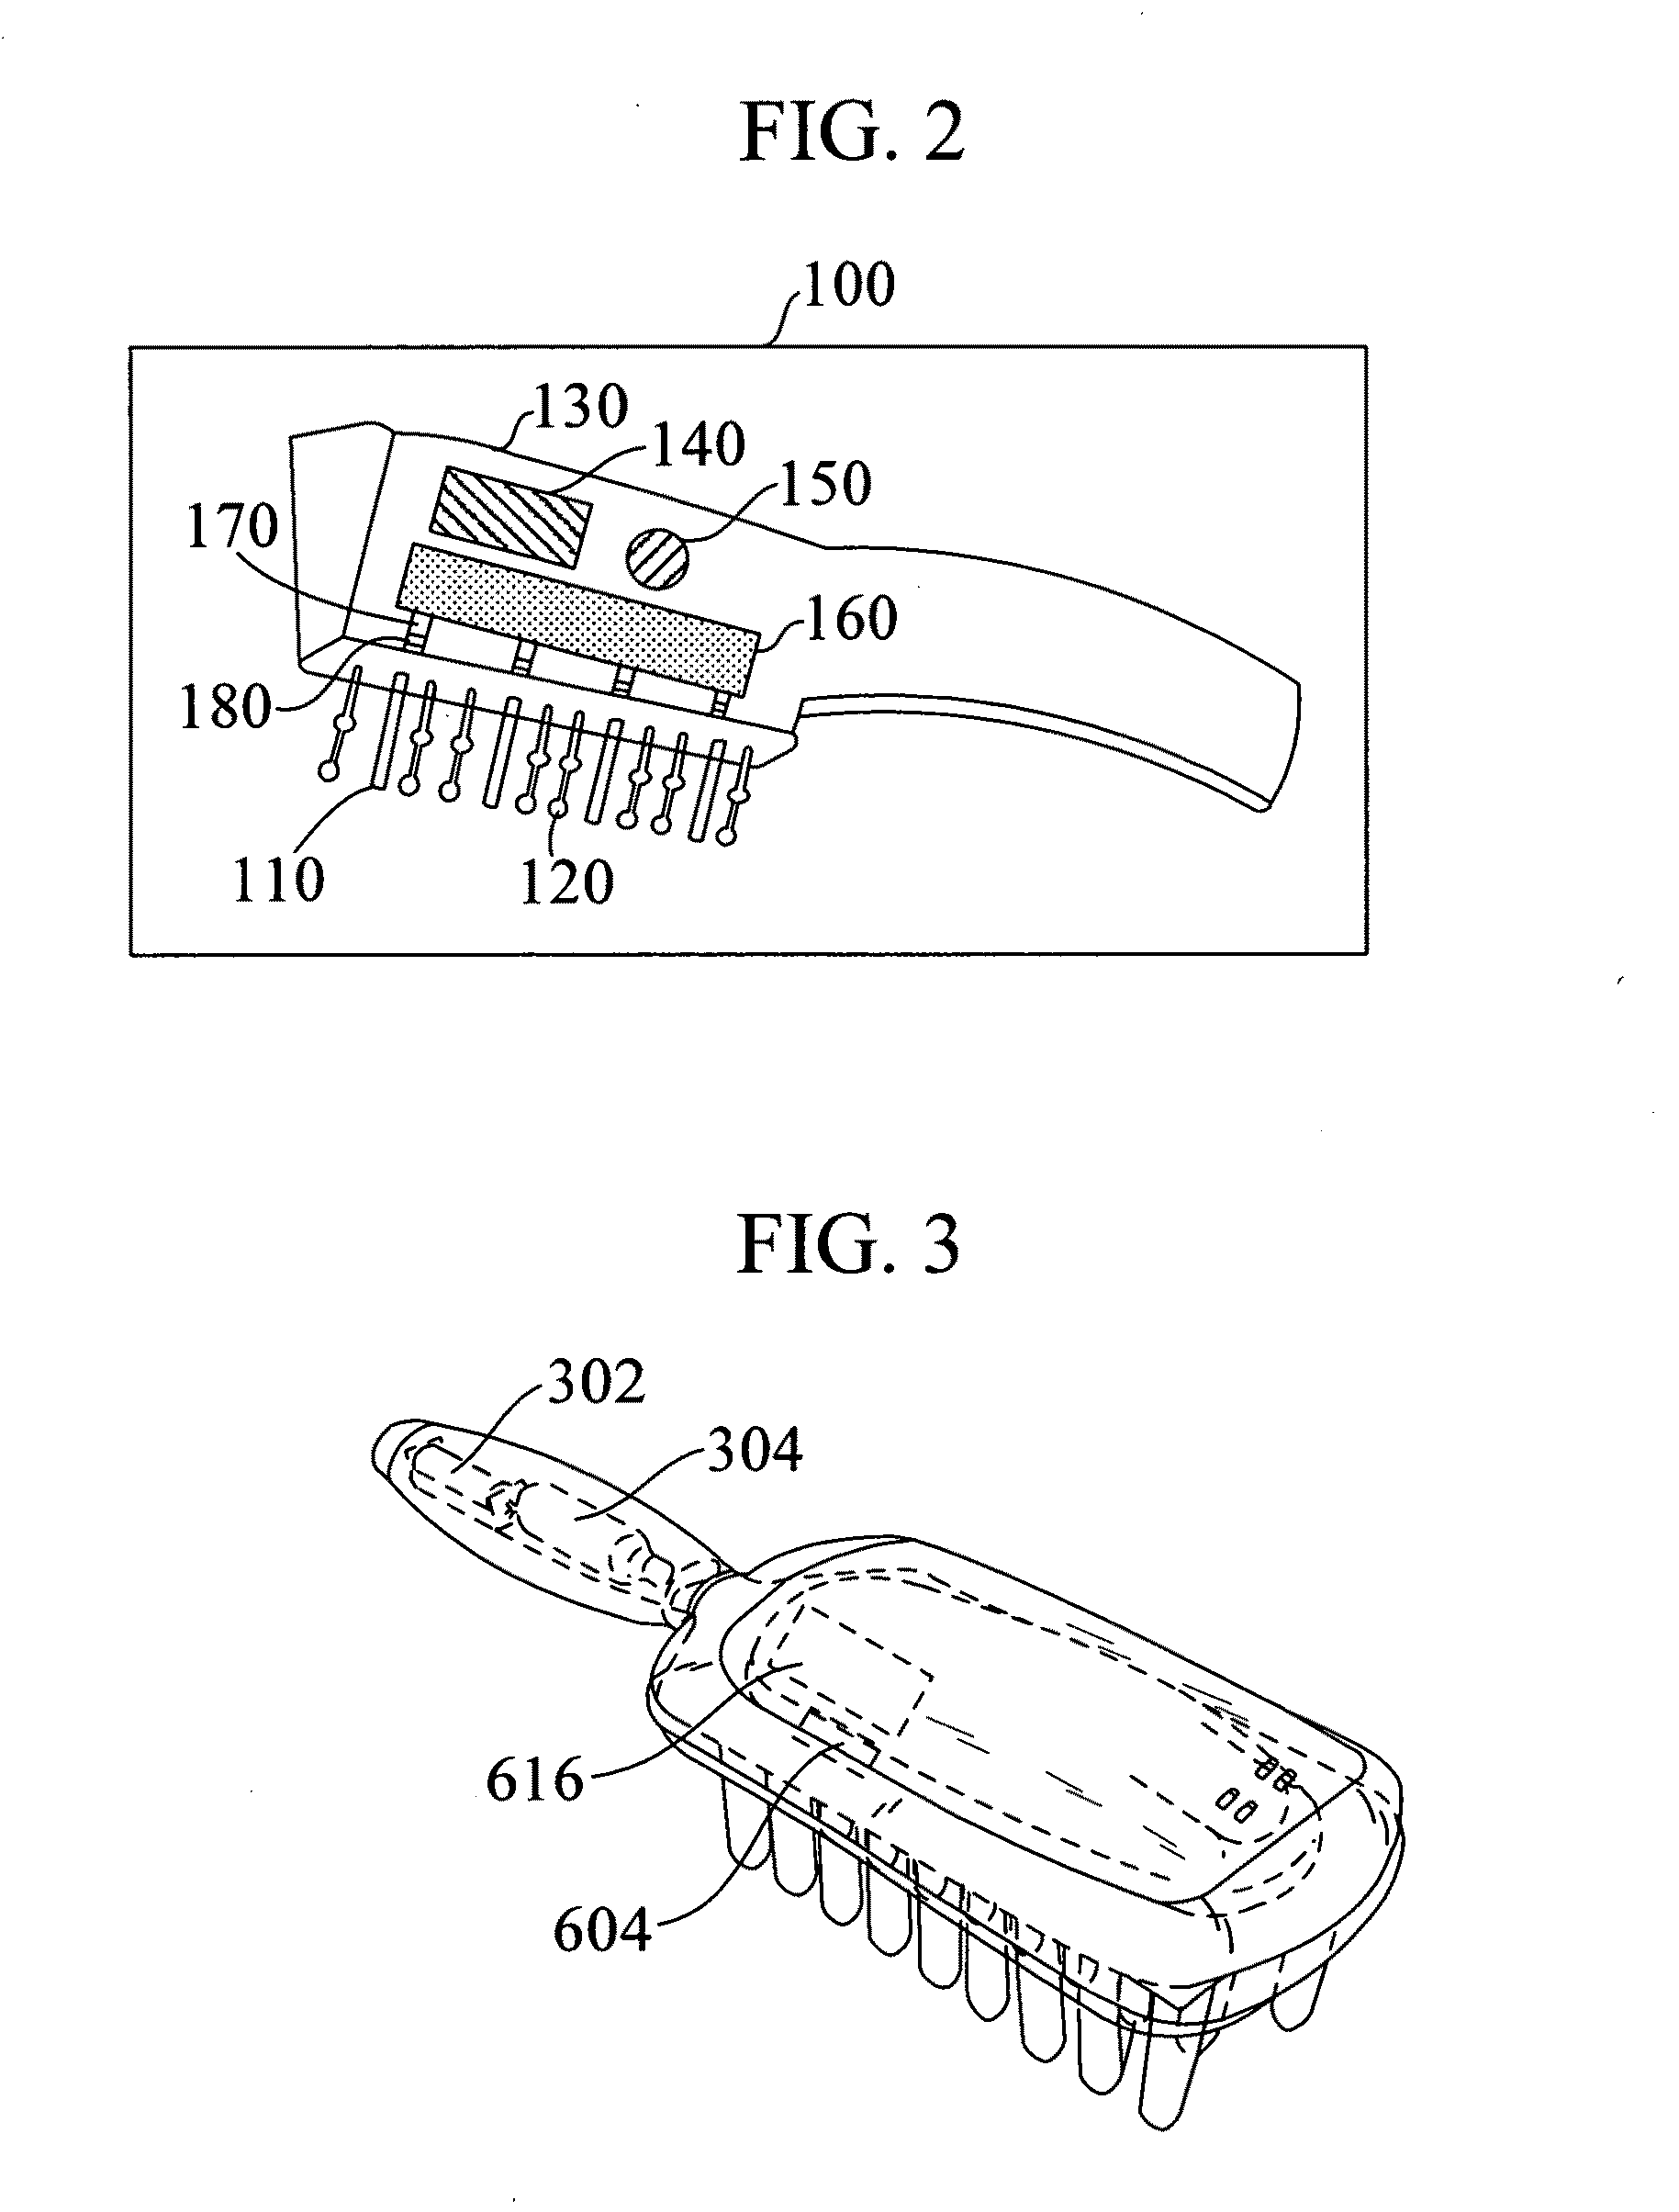 Method and apparatus for precise deposition of hair care agents